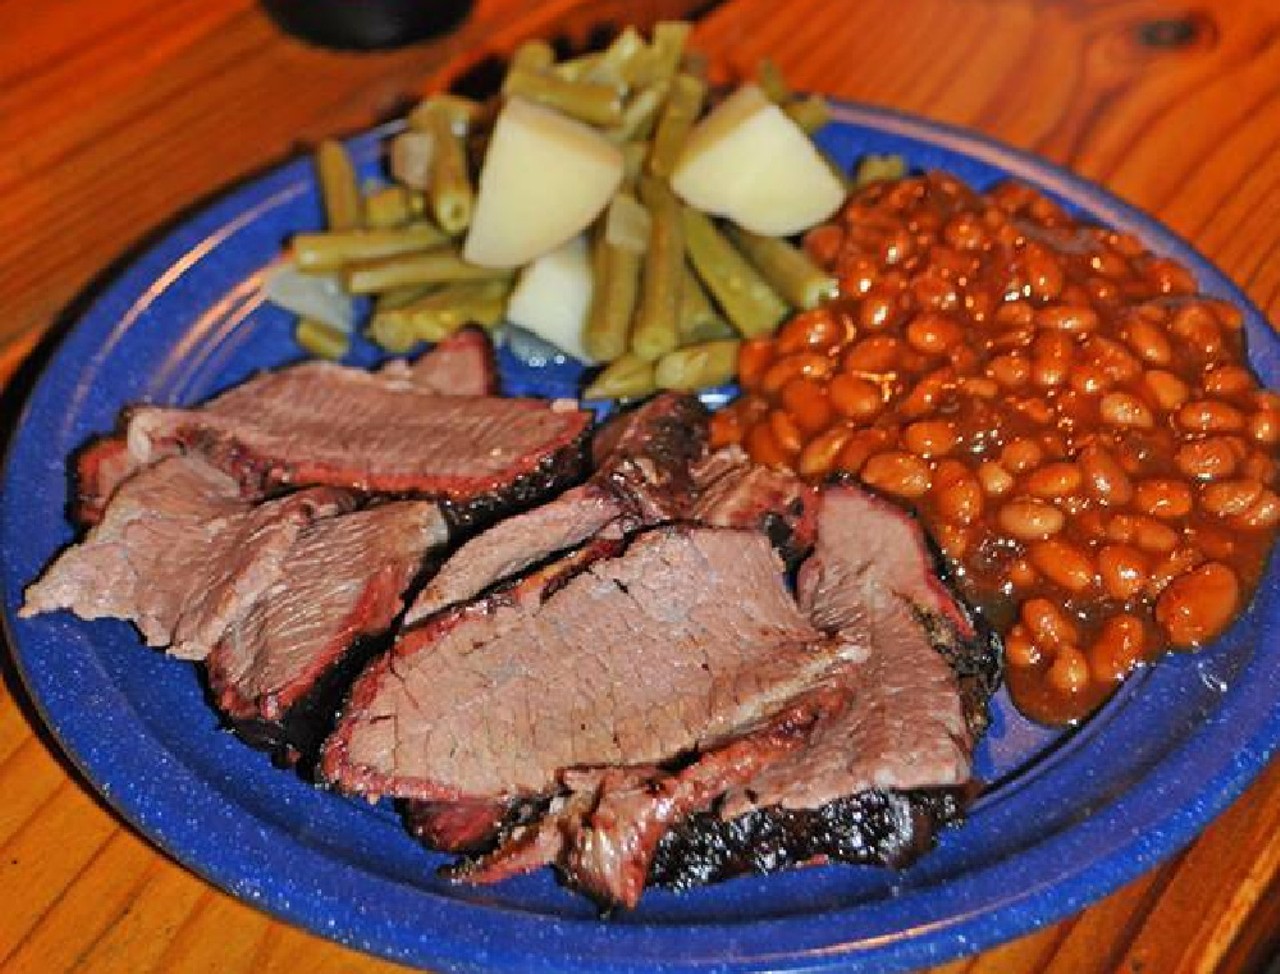 Cecil&#146;s Texas Style BBQ  
2800 S. Orange Ave., 407-423-9871
&#148;Full blown deliciousness. Have been here a few times now and it's delightful! You order up front and then move your tray down the cafe towards the cashier. Great bbq and nice side dishes. Would recommend the sweet potato souffl&eacute;, green beans, and coleslaw. Most meals come with their buttery Texas toast too.&#148; - Mia P.
Photo via Cecil&#146;s Texas Style BBQ/Facebook